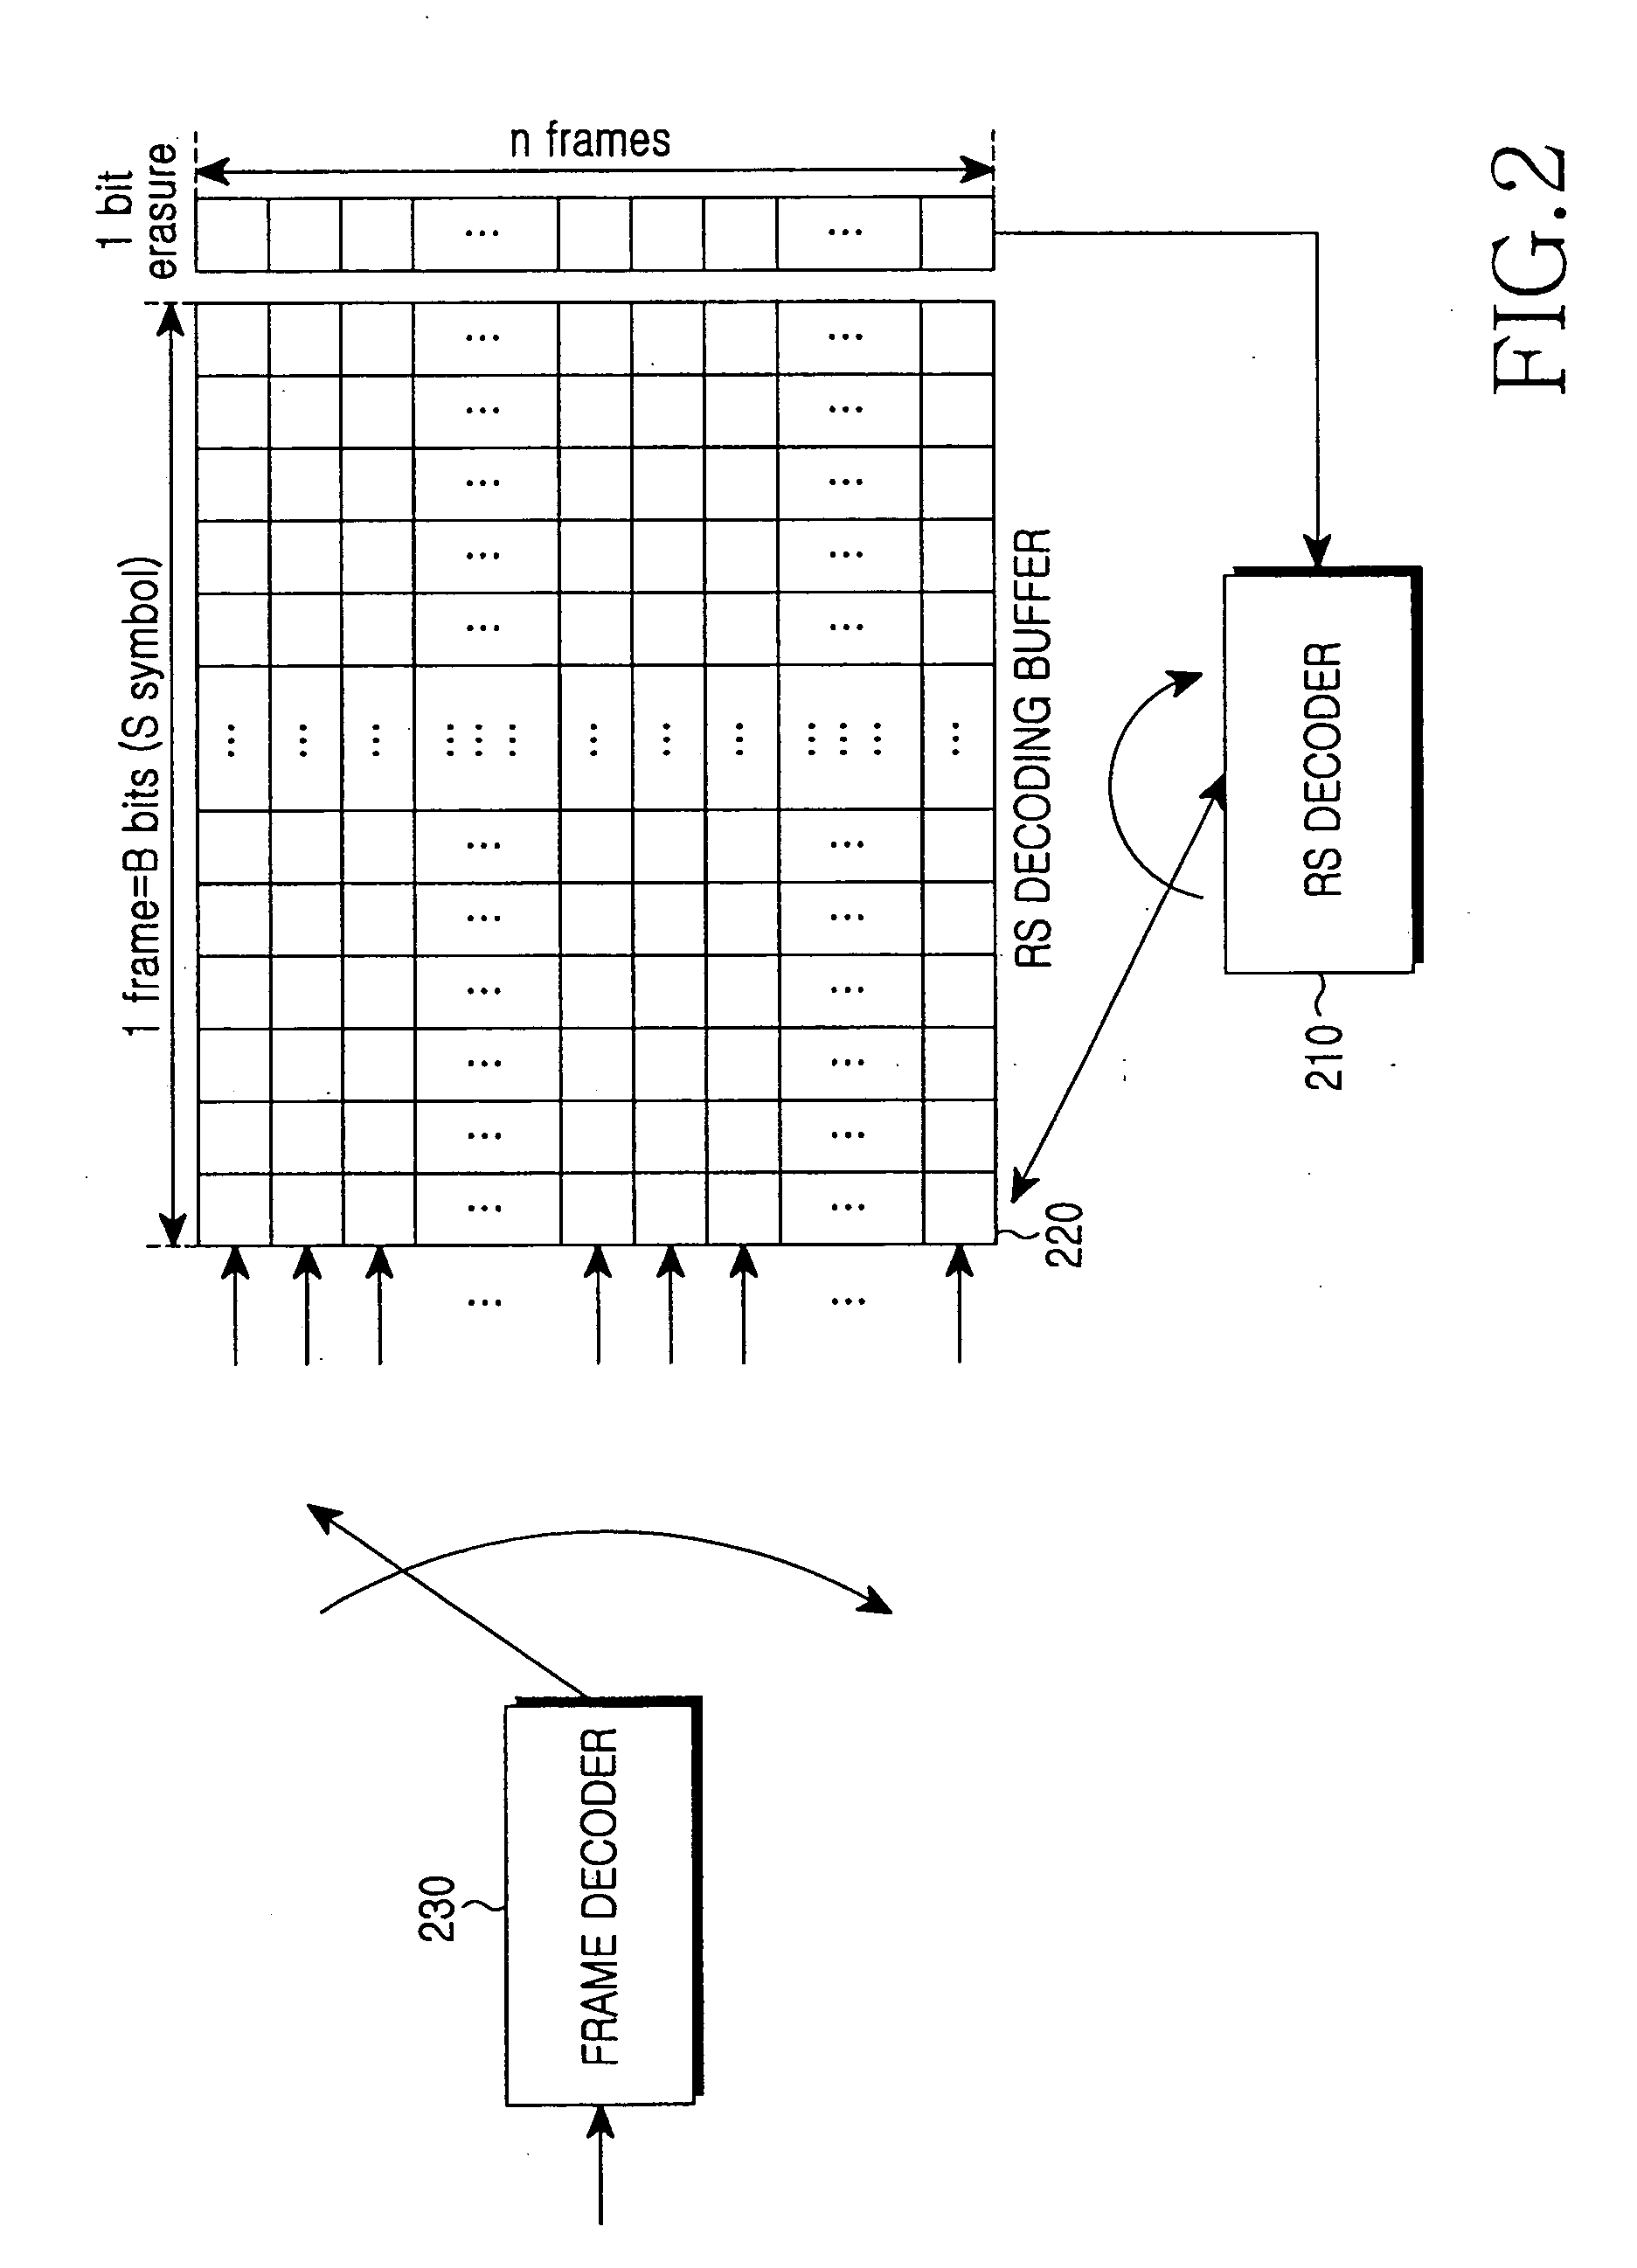 Apparatus and method for decoding Reed-Solomon code